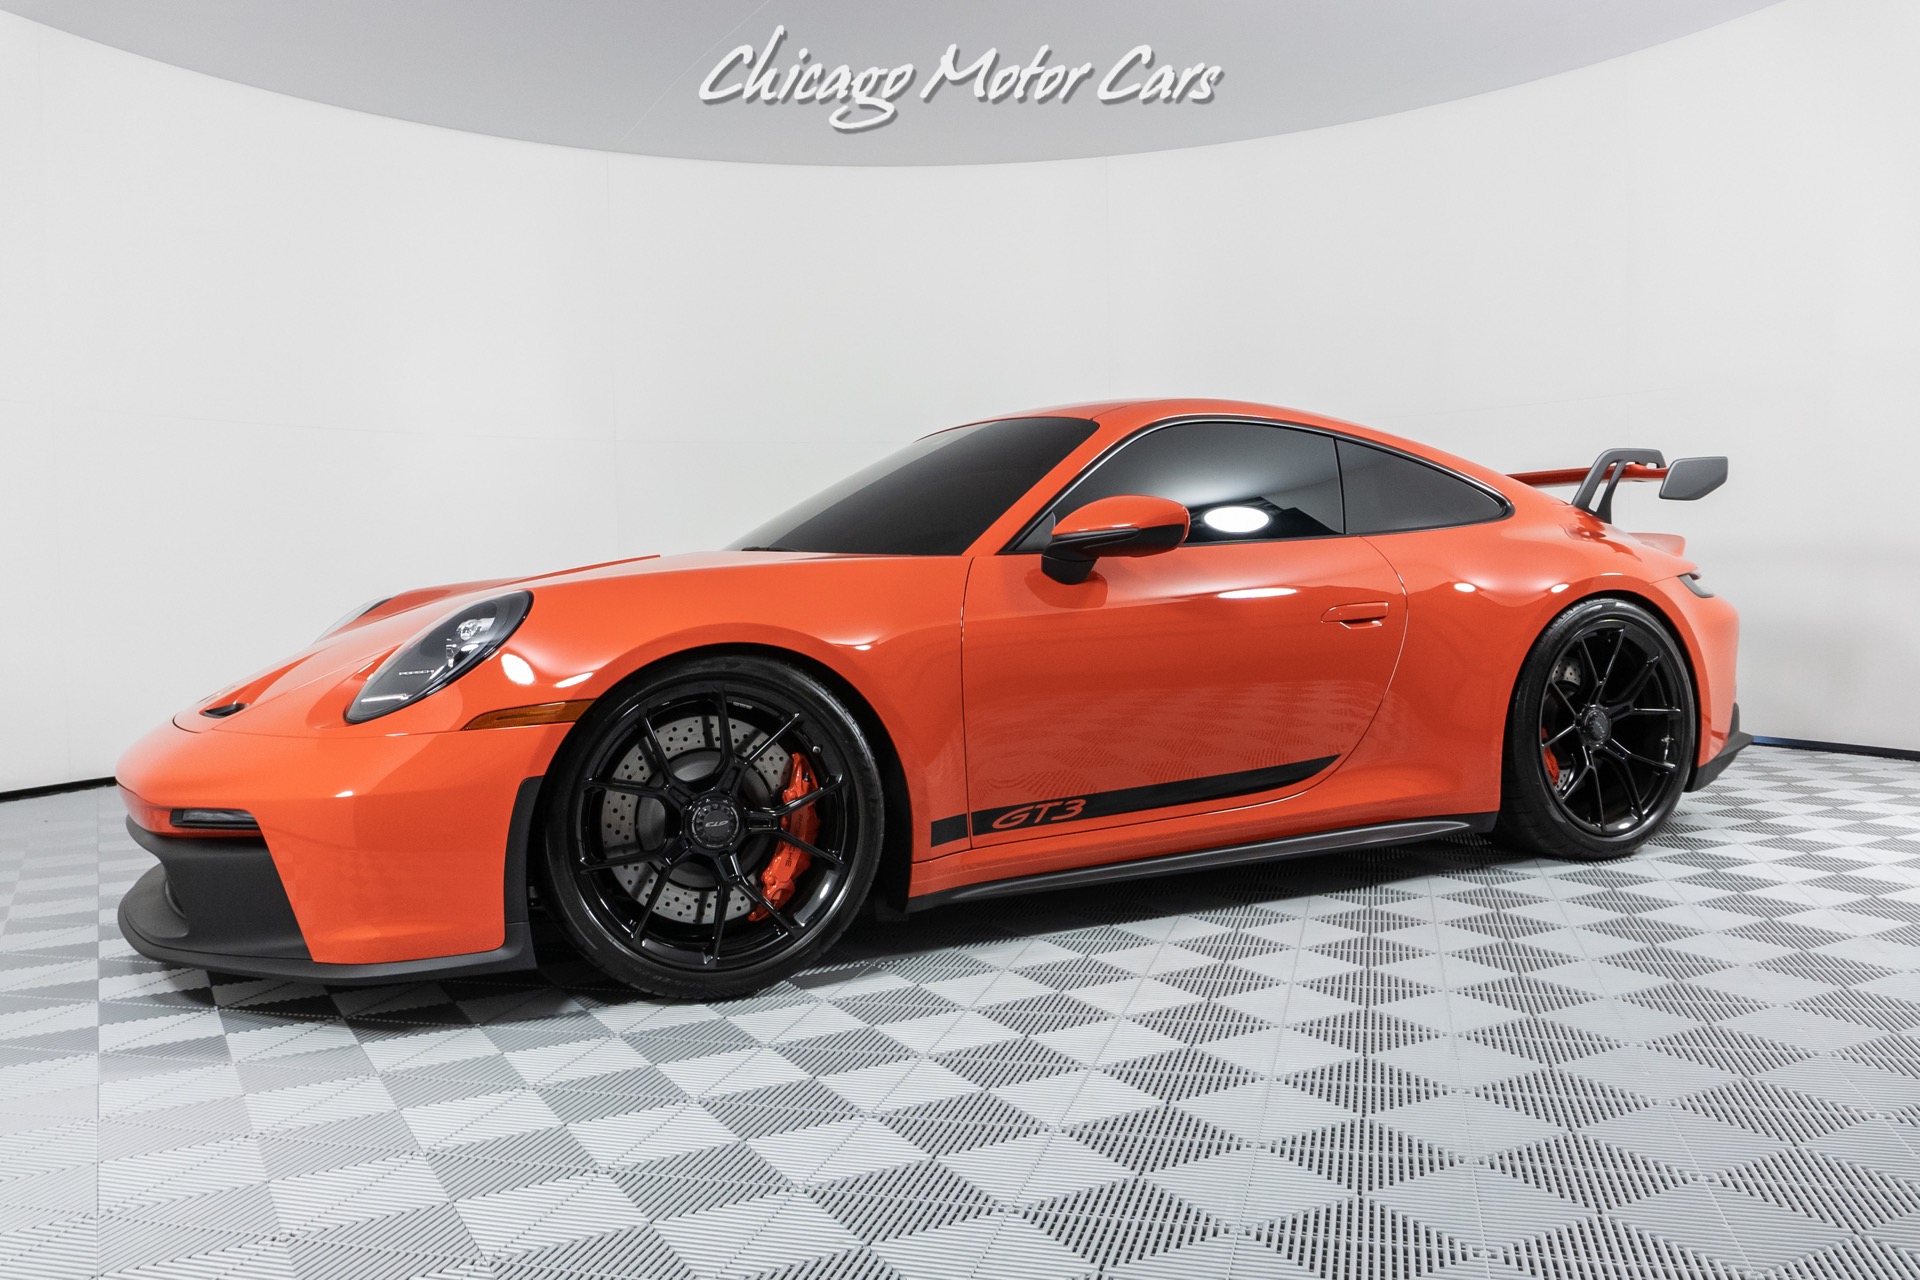 Used 2022 Porsche 911 GT3 Coupe New Generation 992 Lava Orange! Carbon  Bucket Seats! LOADED For Sale ($279,800) | Chicago Motor Cars Stock  NS269158 SS